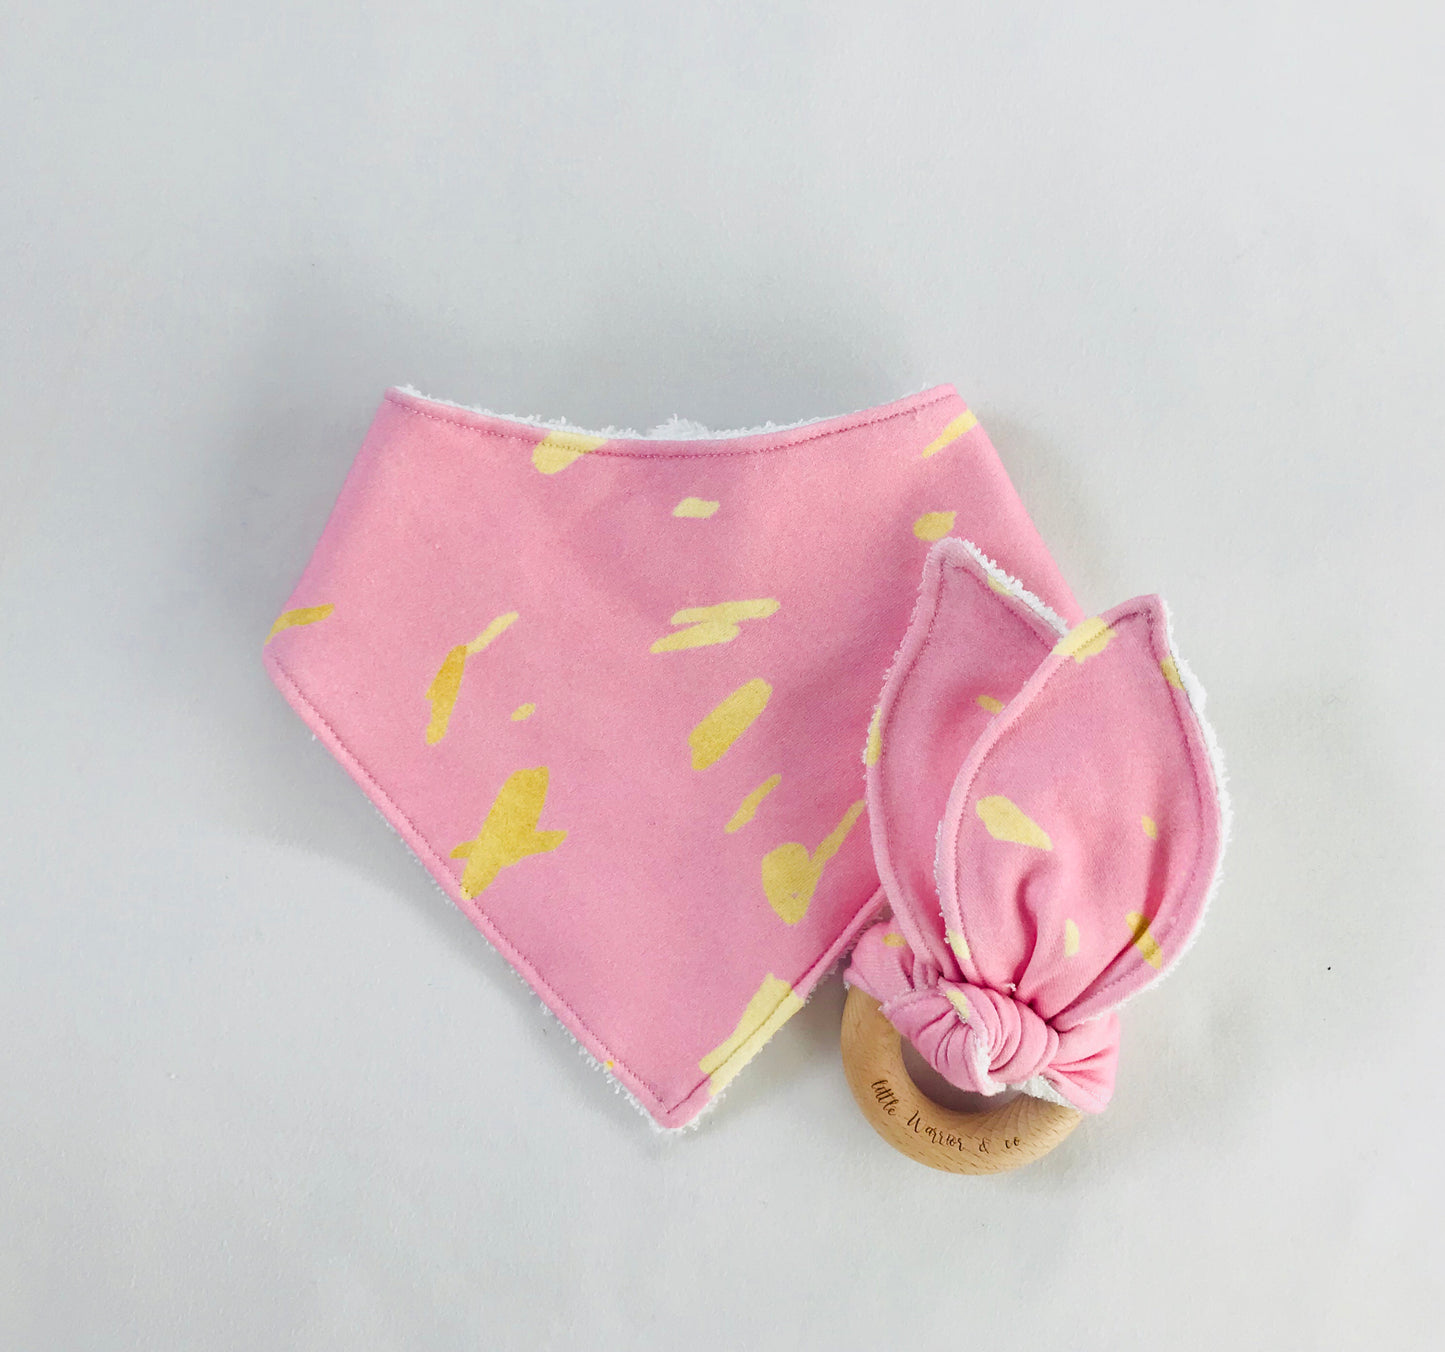 Kindred Spirits Pink Organic Cotton Fabric Teether